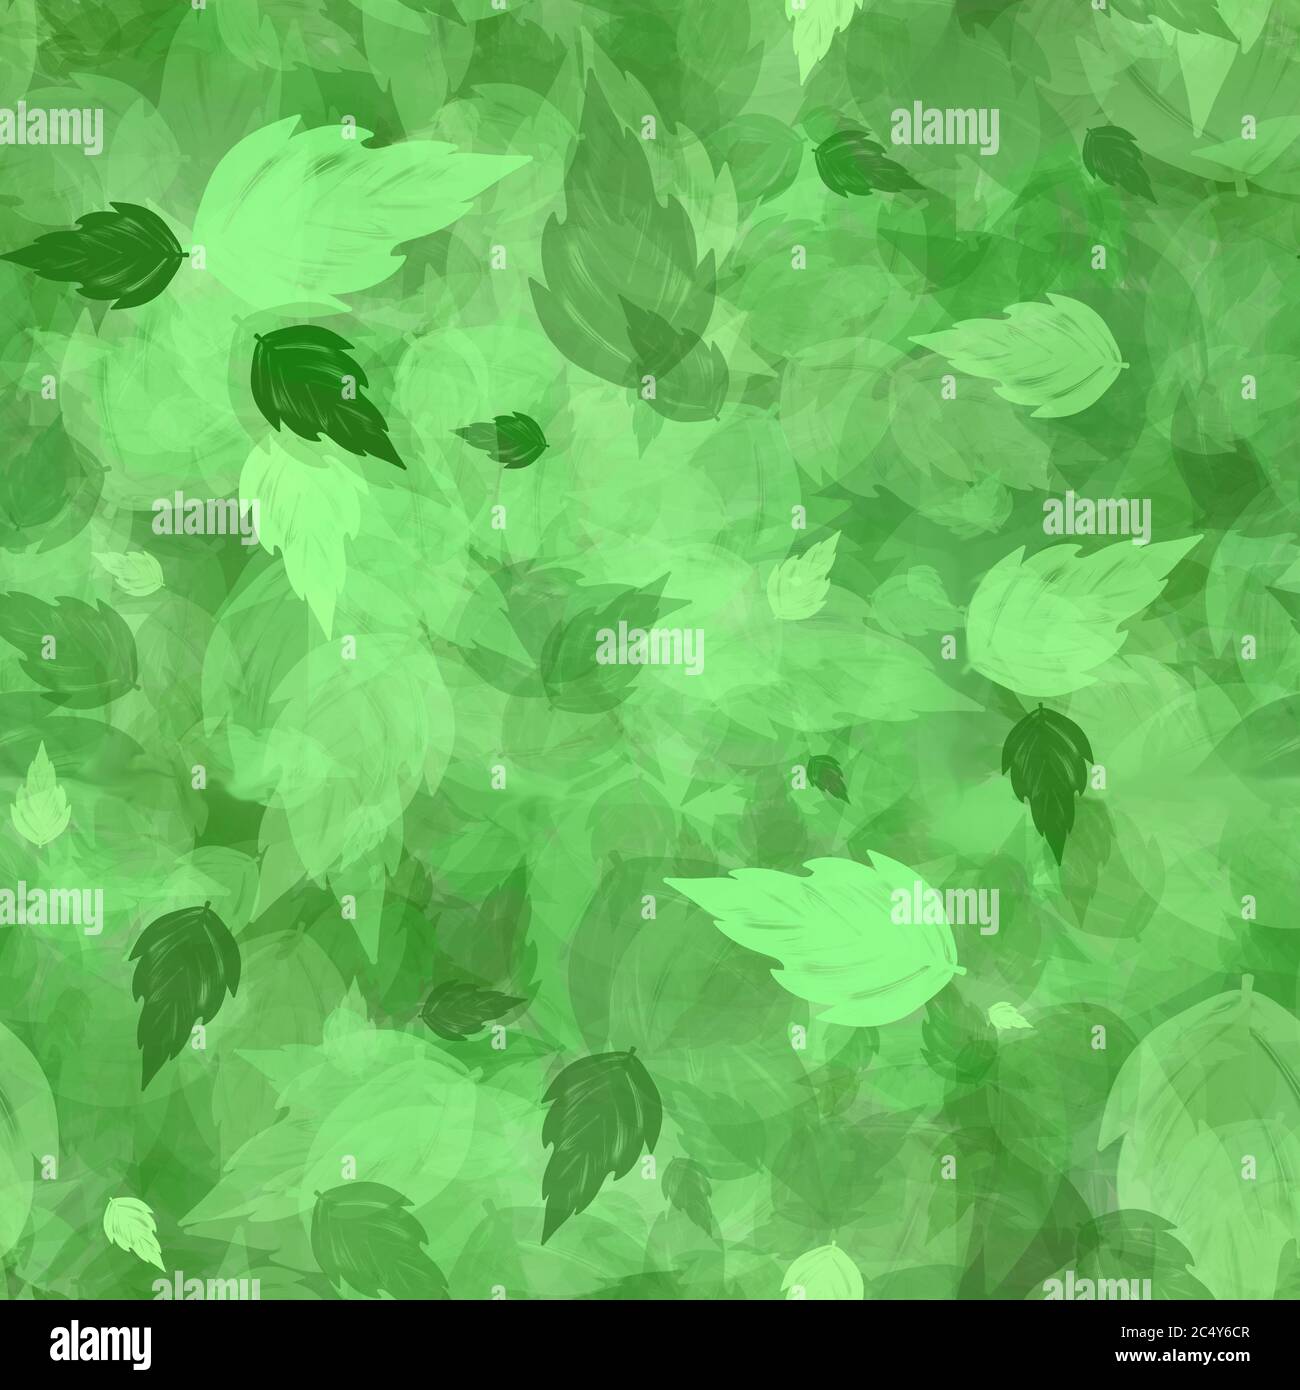 Seamless pattern and background with fresh green leaves. Stock Photo